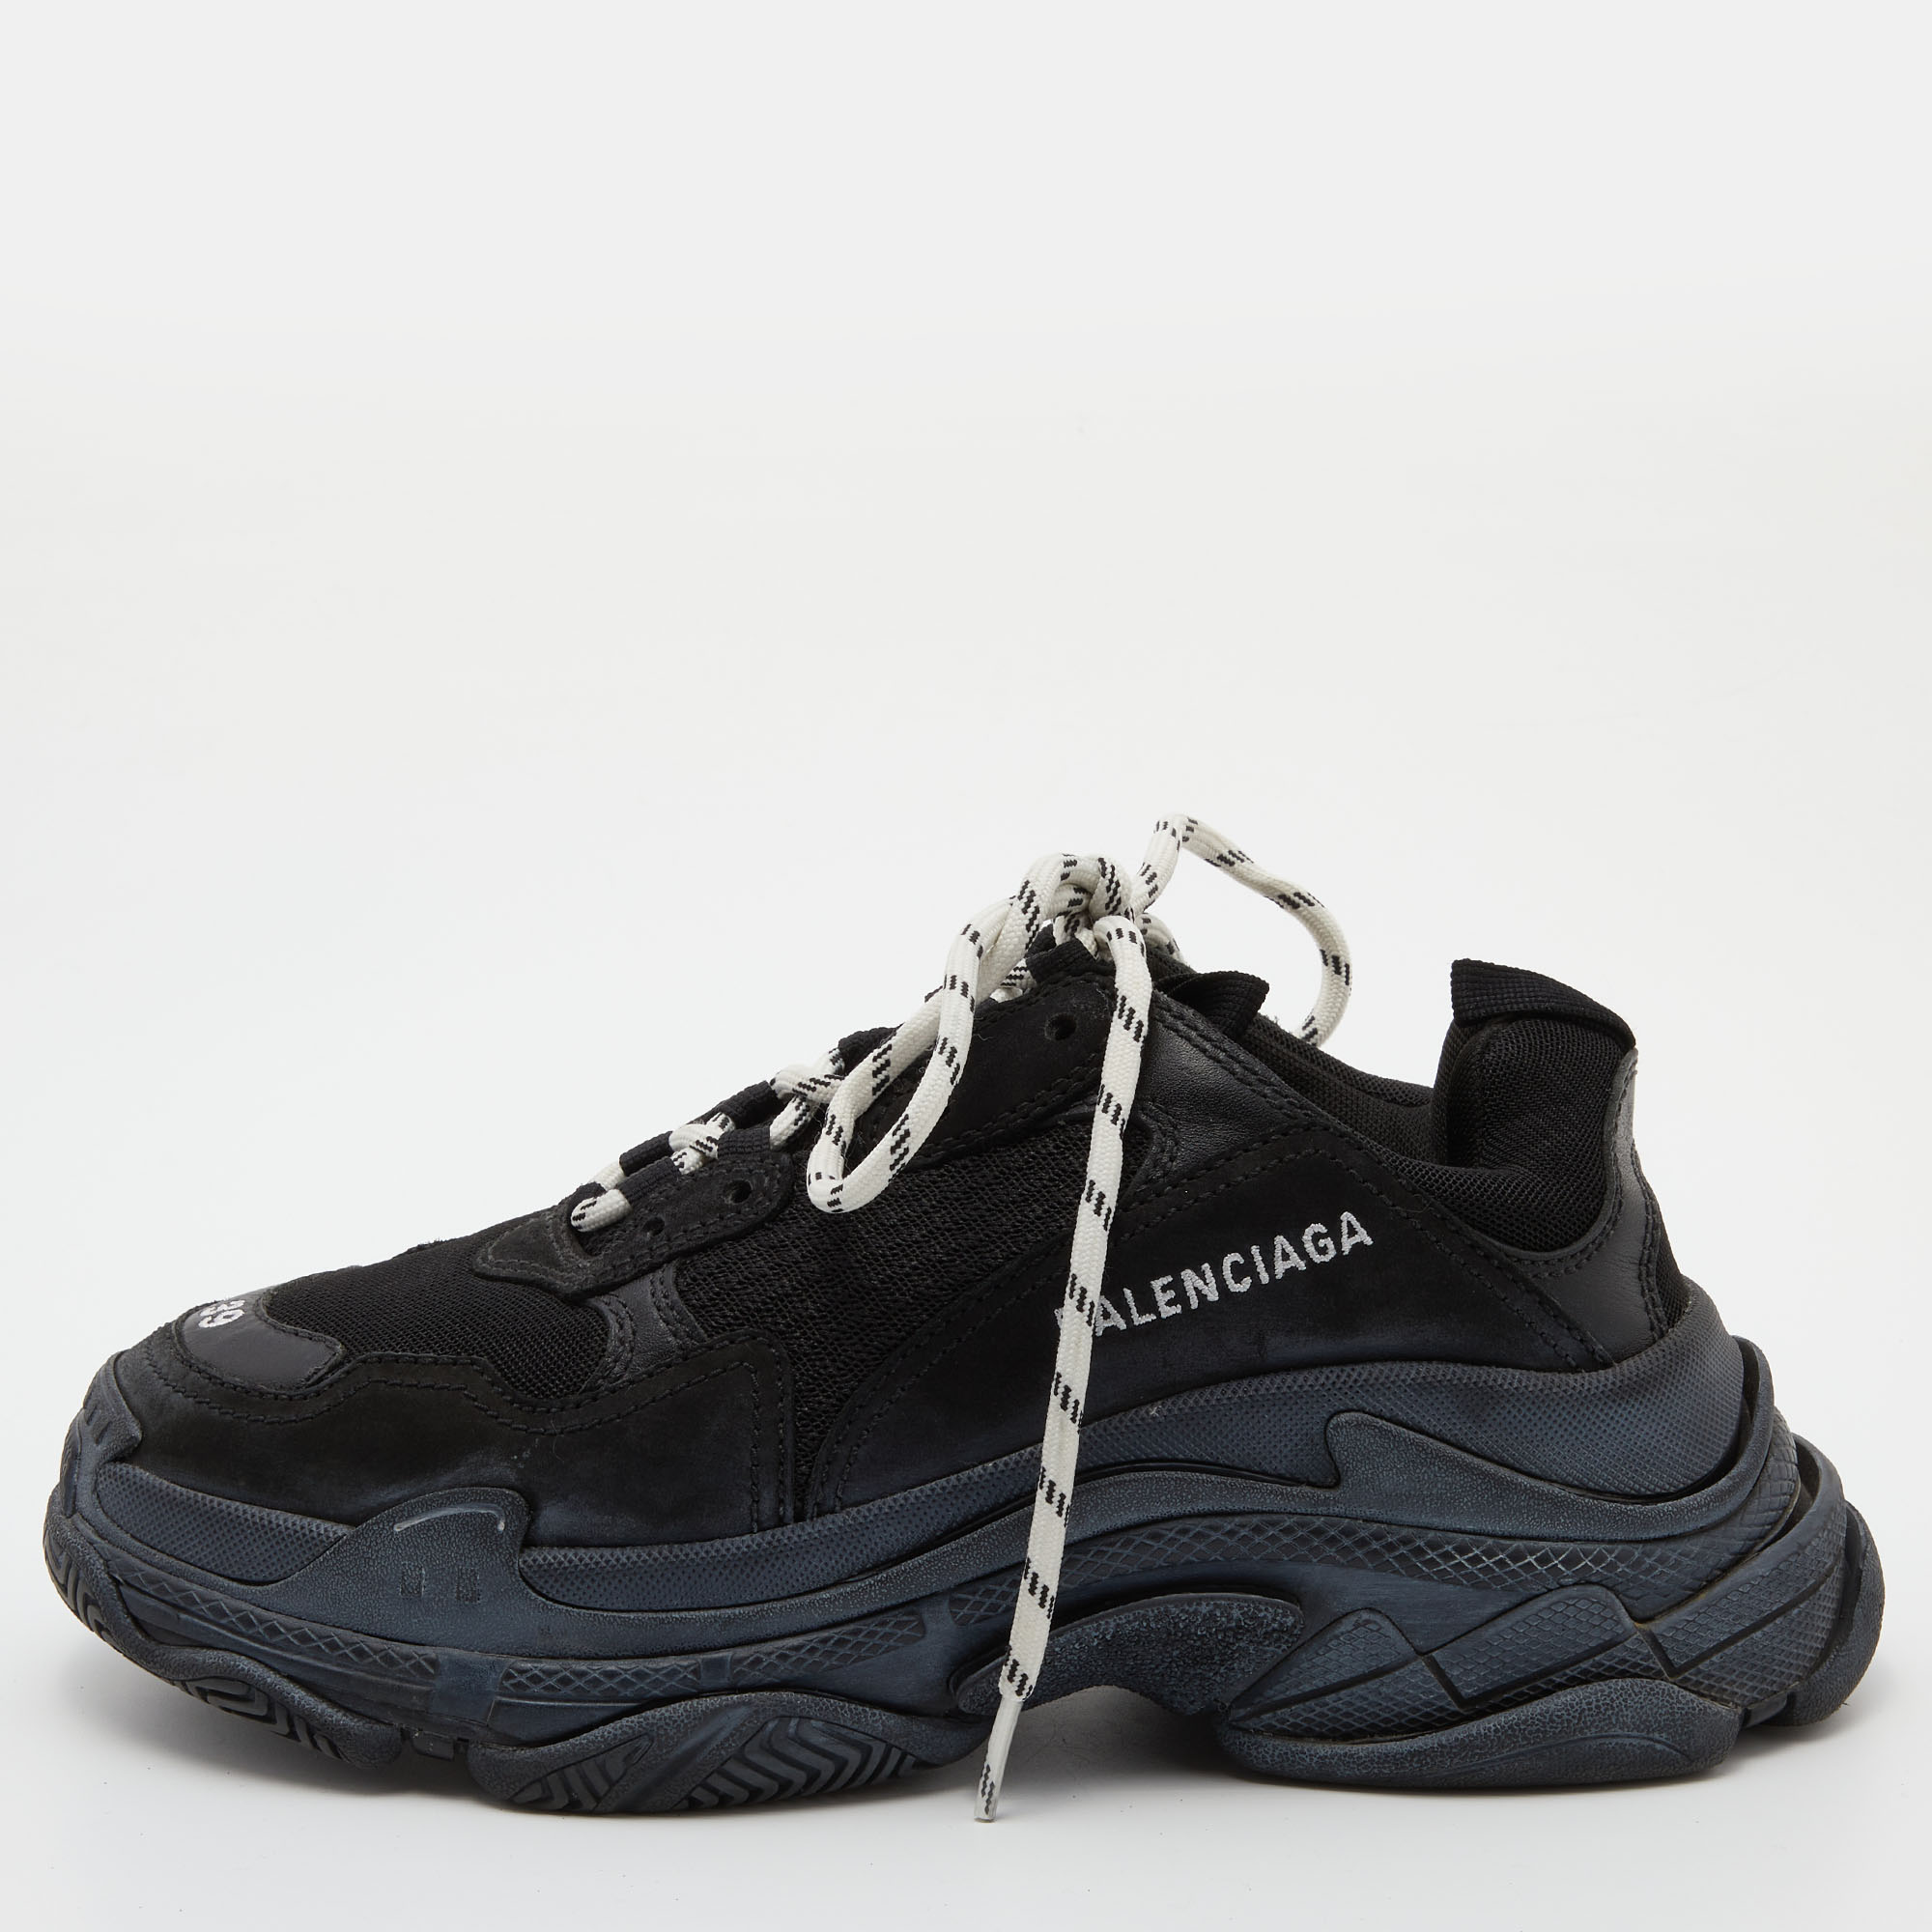 Balenciaga Black Mesh And Leather Triple S Sneakers Size 39